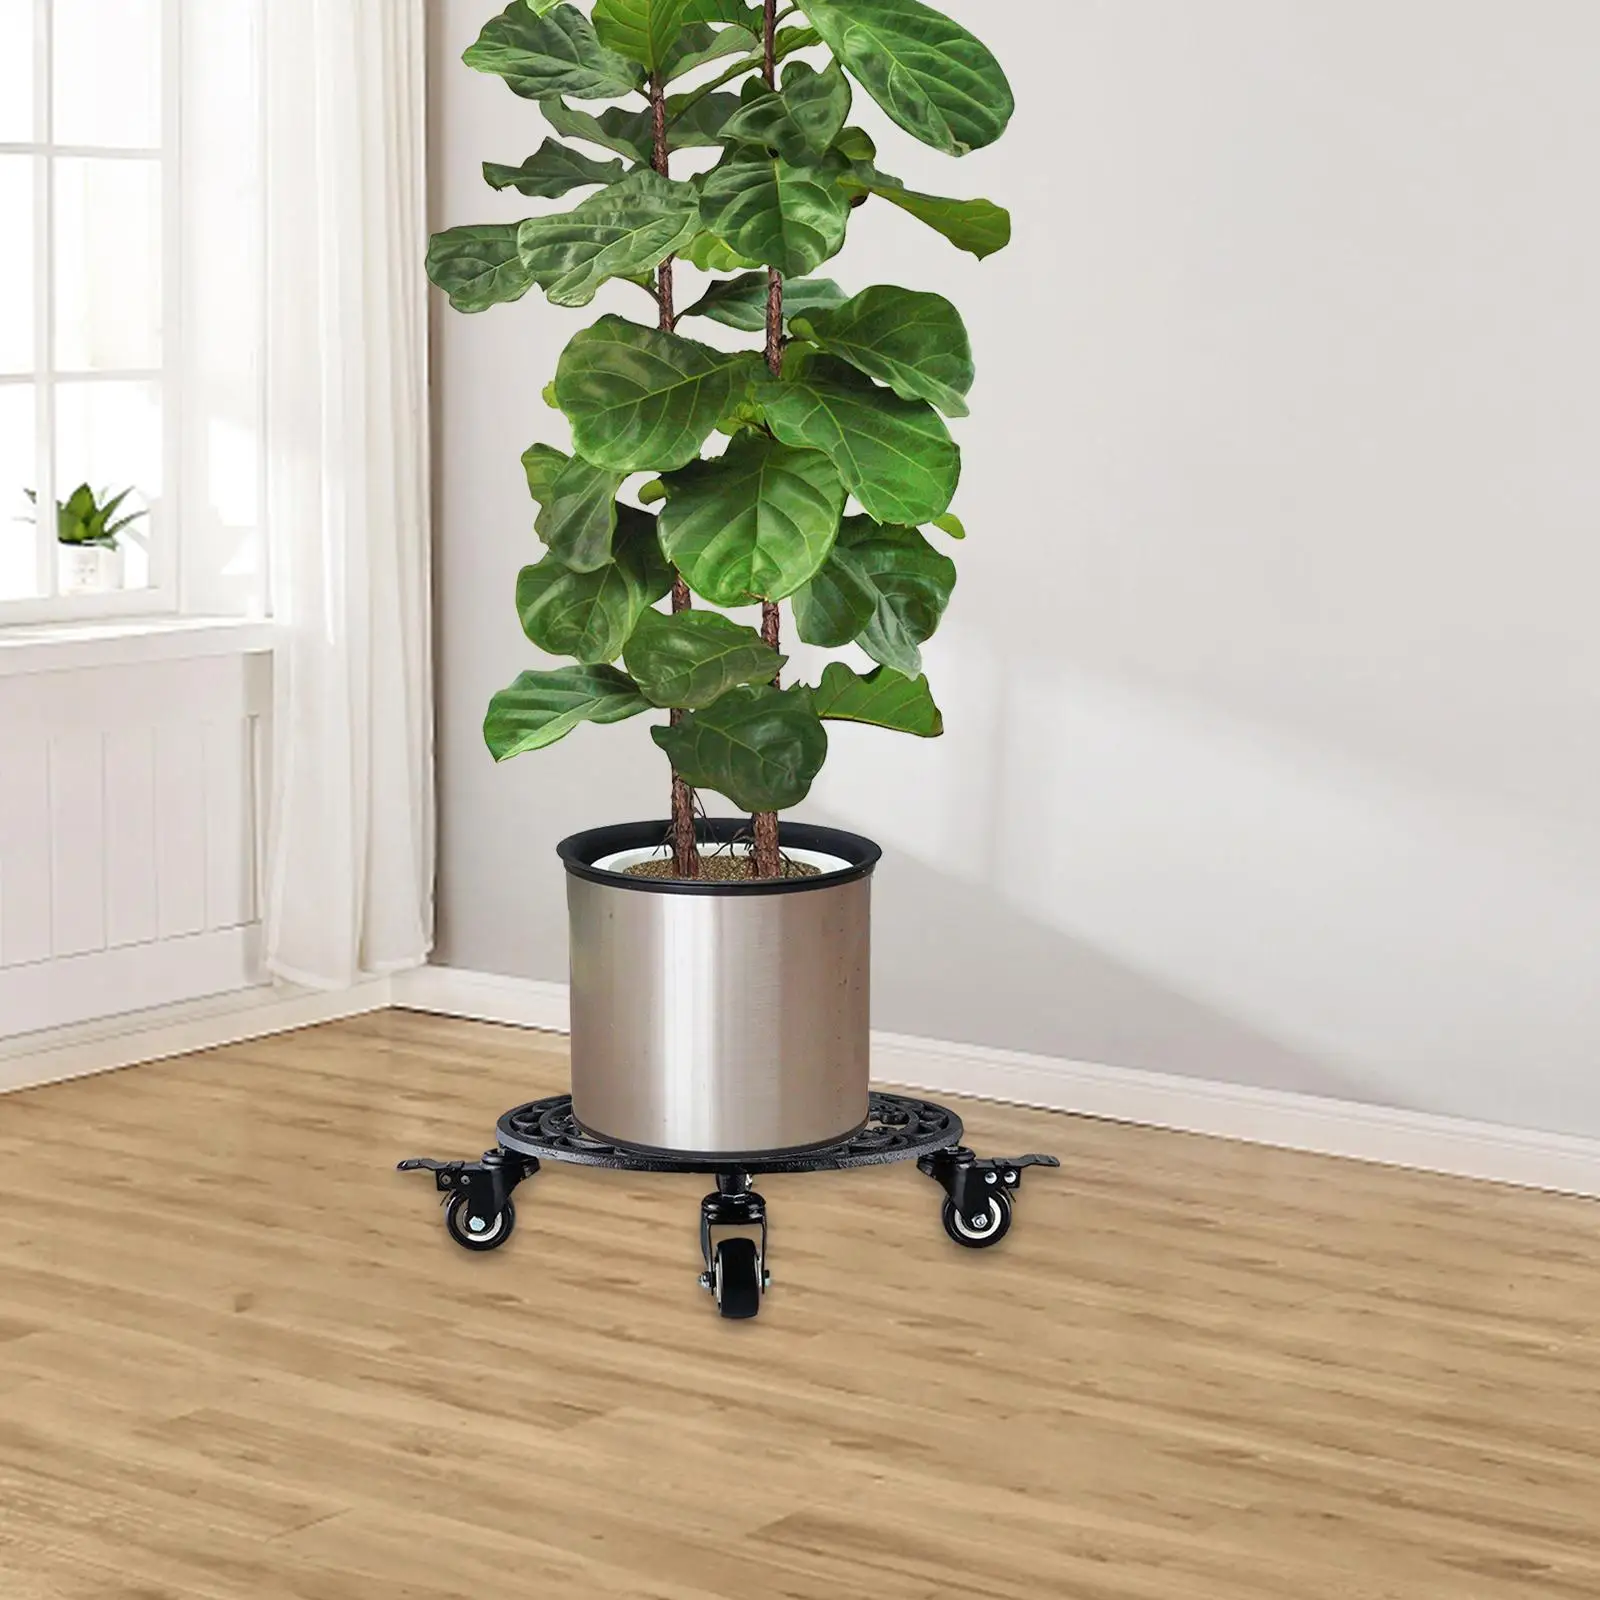 Planter Caddy Potted Planter Stand with Wheels Versatile 360° Rotating Wheels 32.5cm Round for Large Vases, Heavy Trash Bin